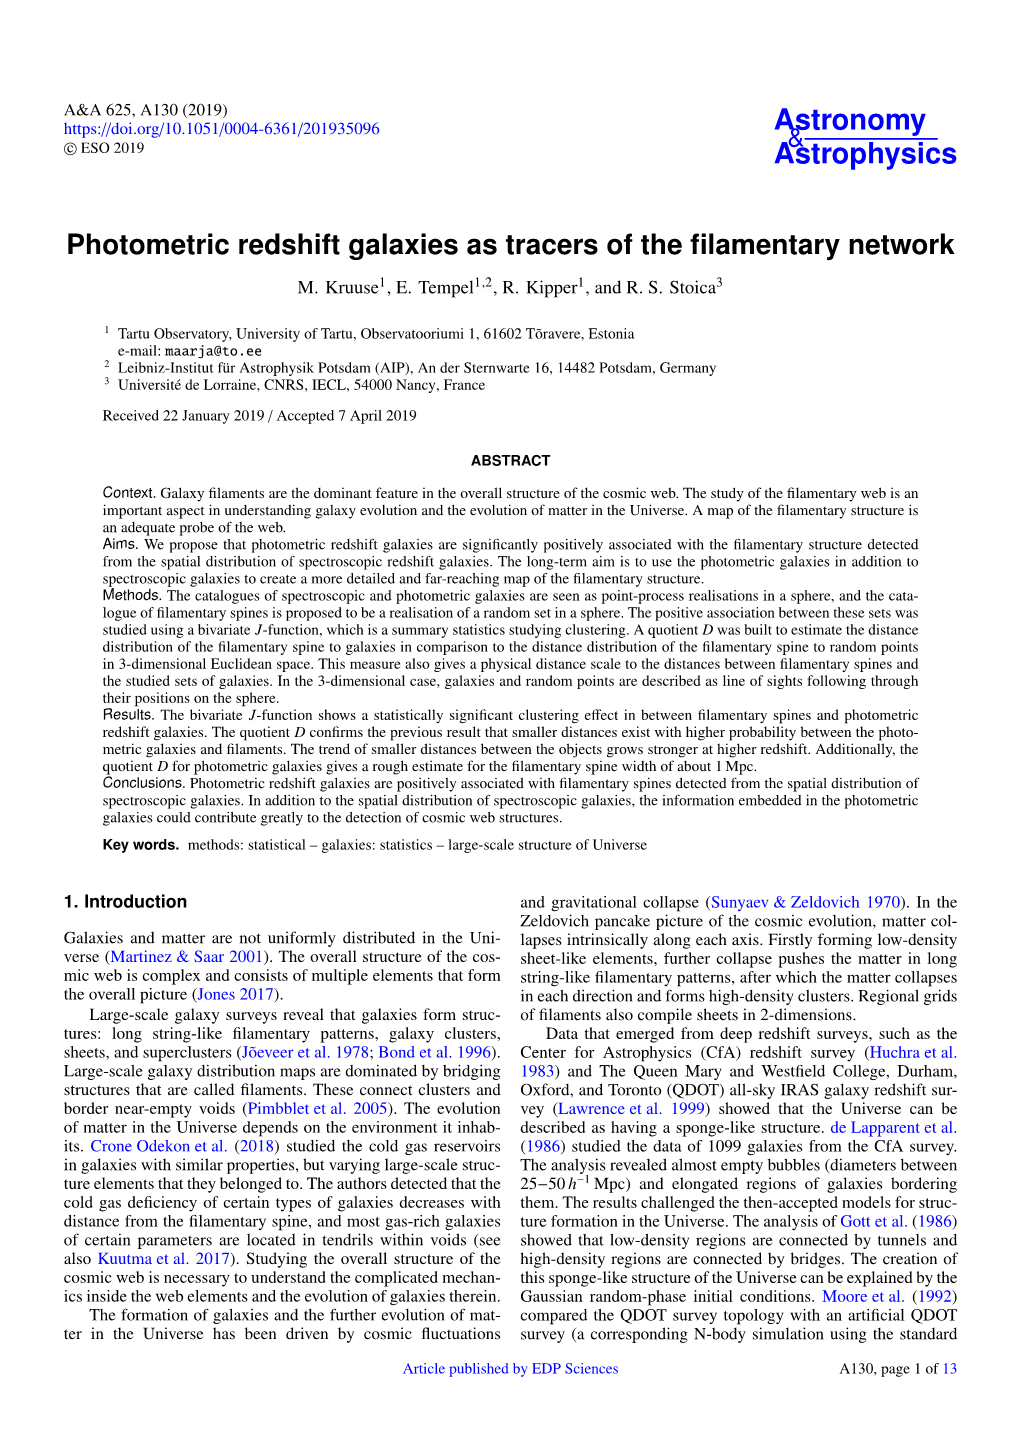 Photometric Redshift Galaxies As Tracers of the Filamentary Network